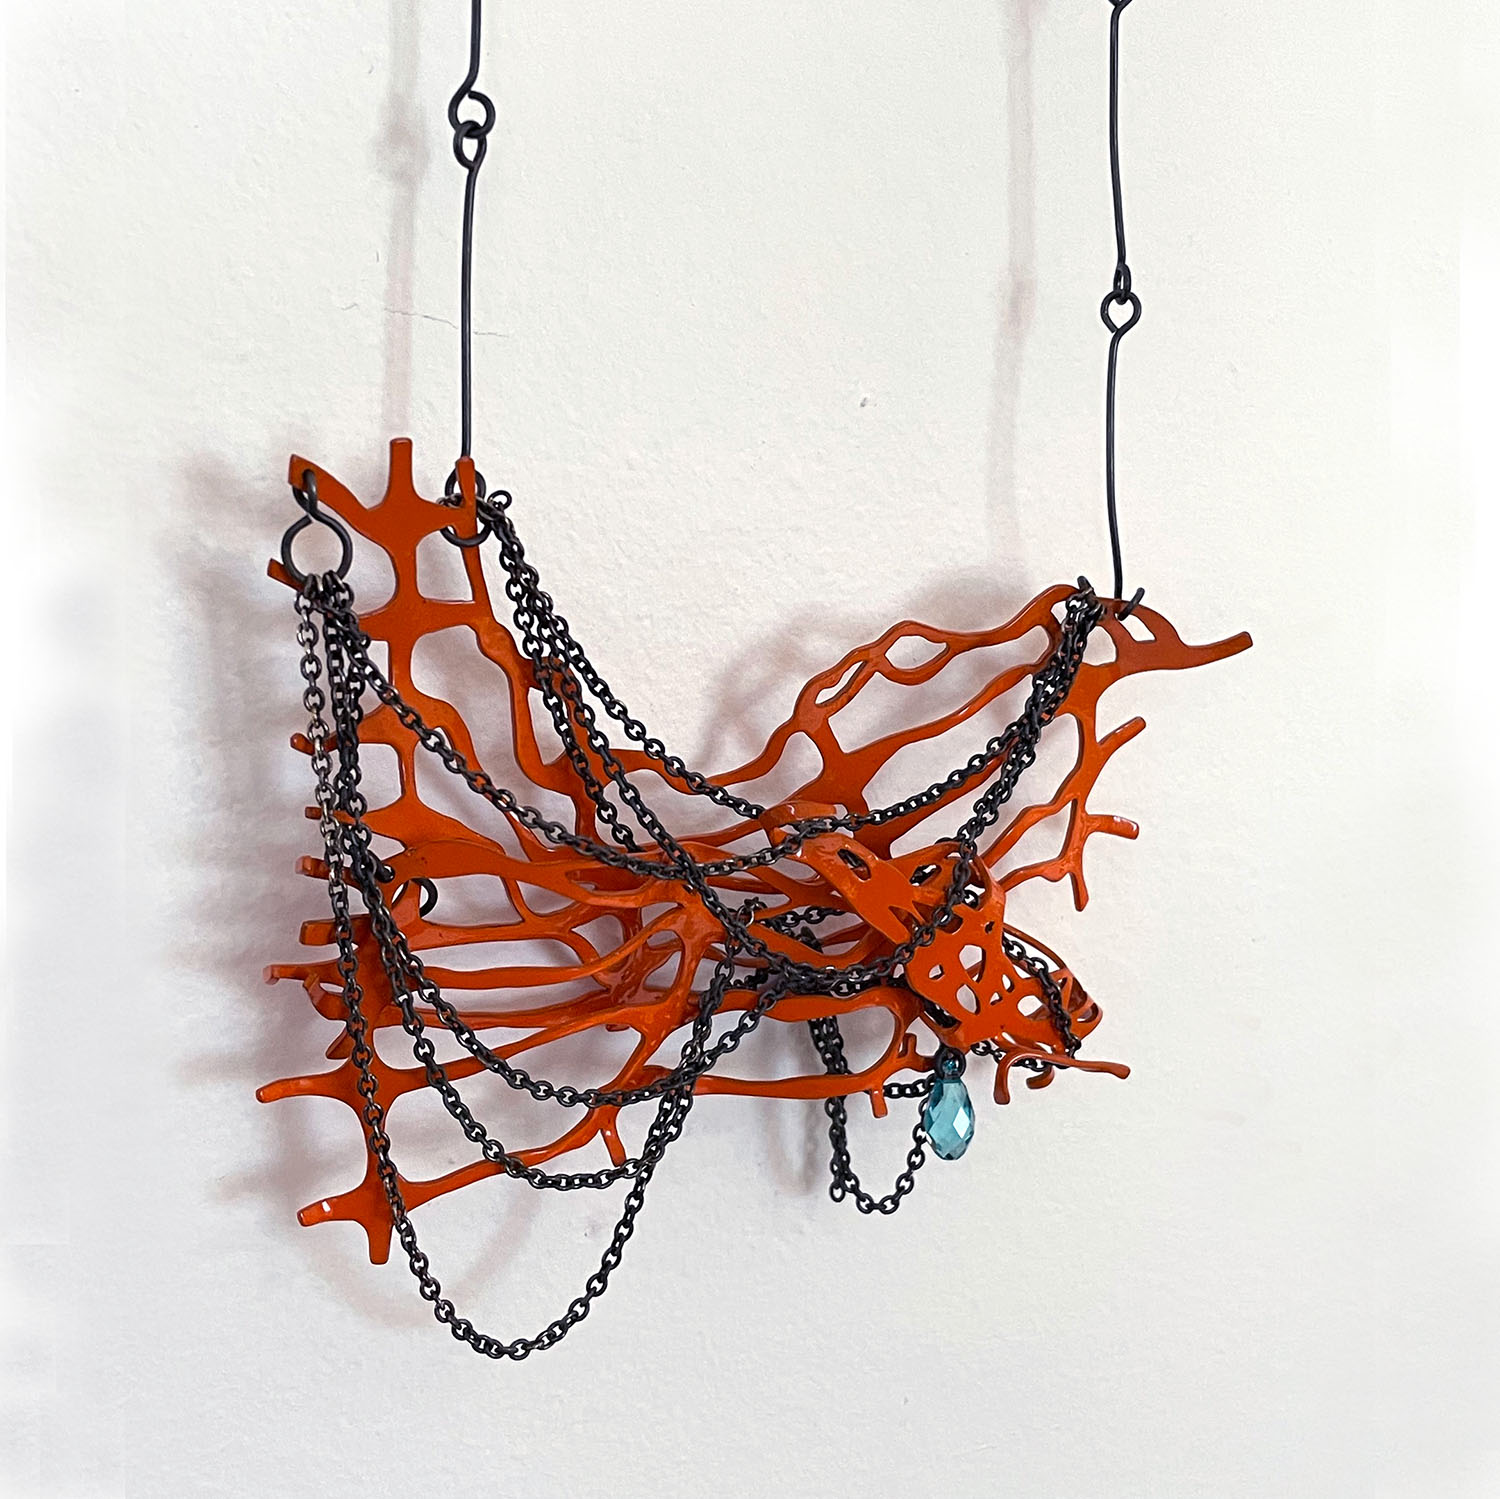 construction jewelry tangled fence pin by Natalie Macellaio